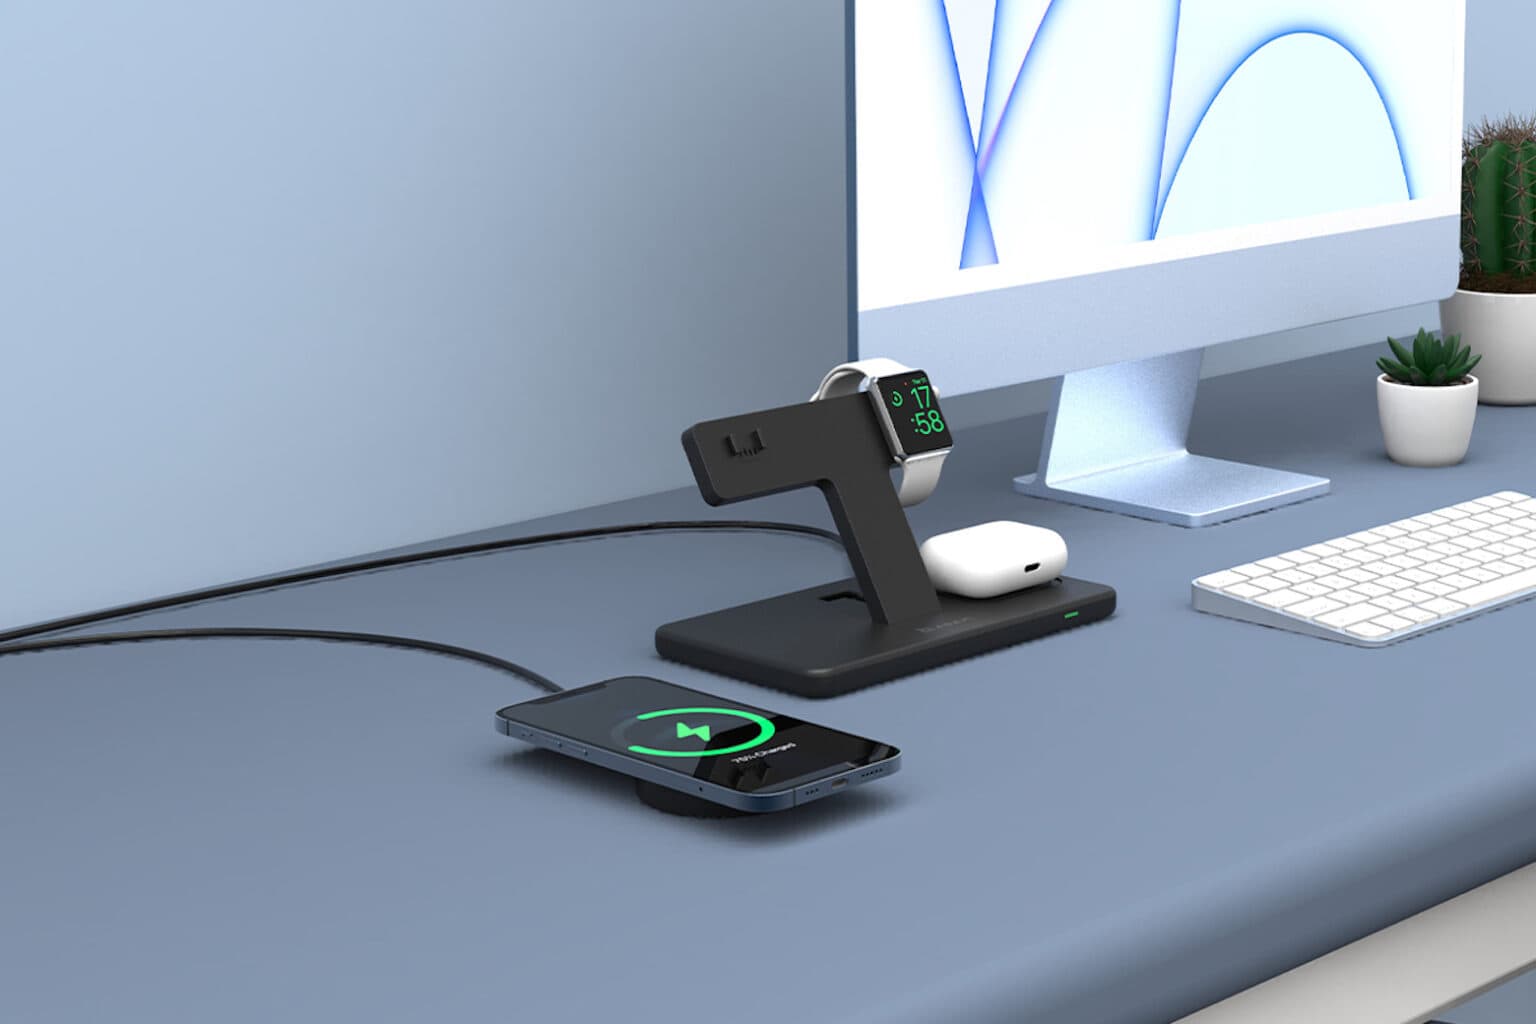 Get 15% off this charging station during the pre-black friday sale.